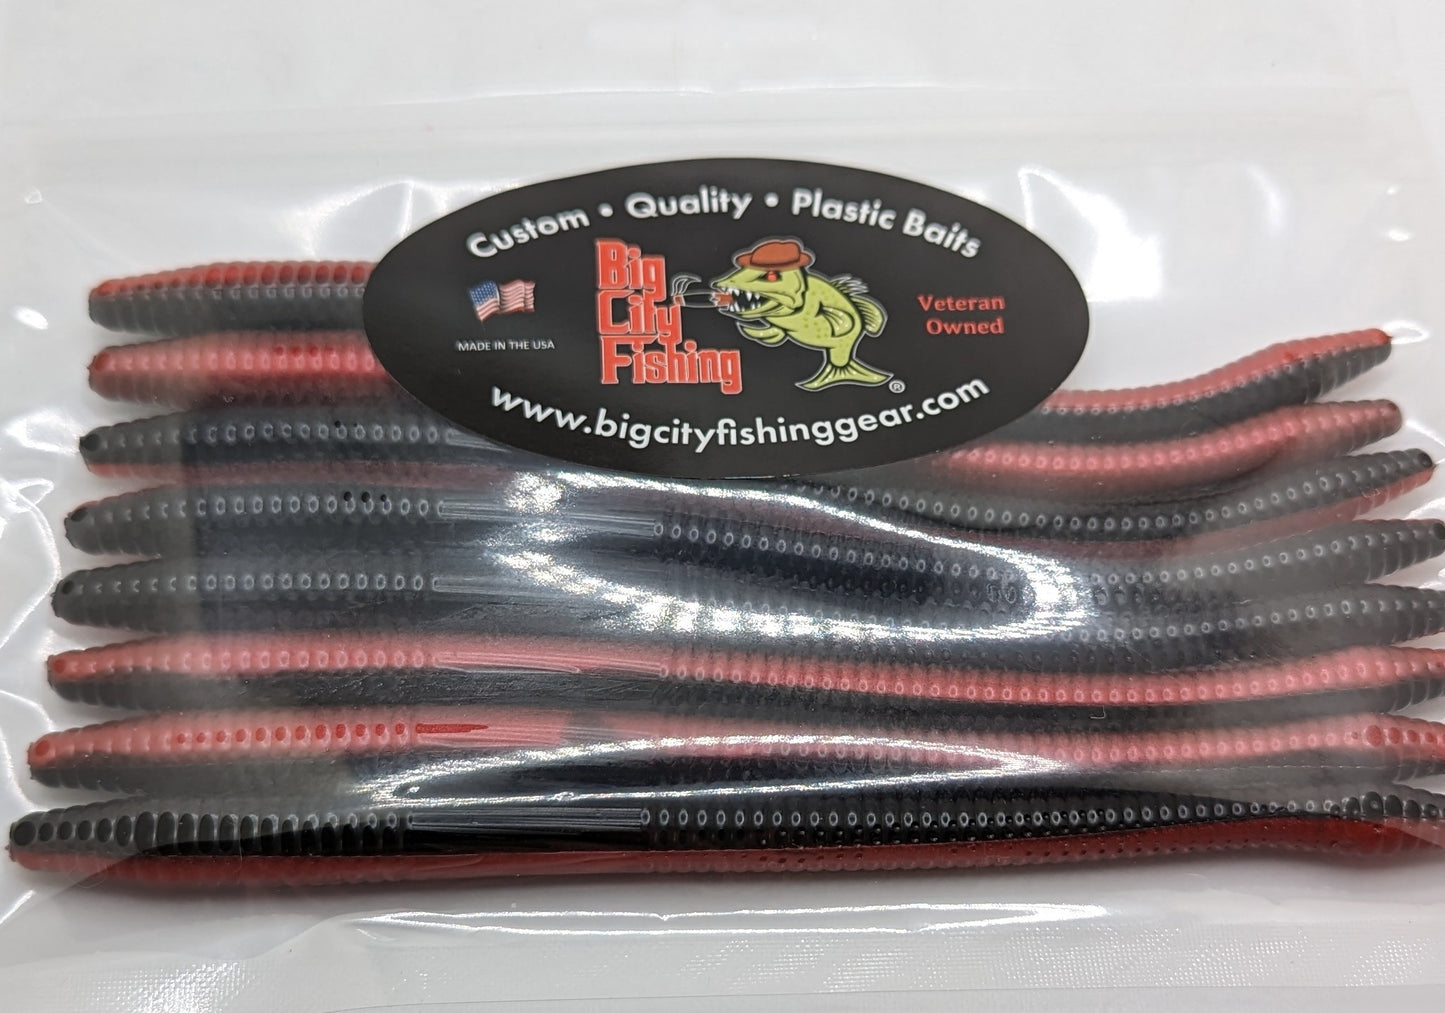 FW-1 F Ness Worm Red Shad 6.25" 8Pack